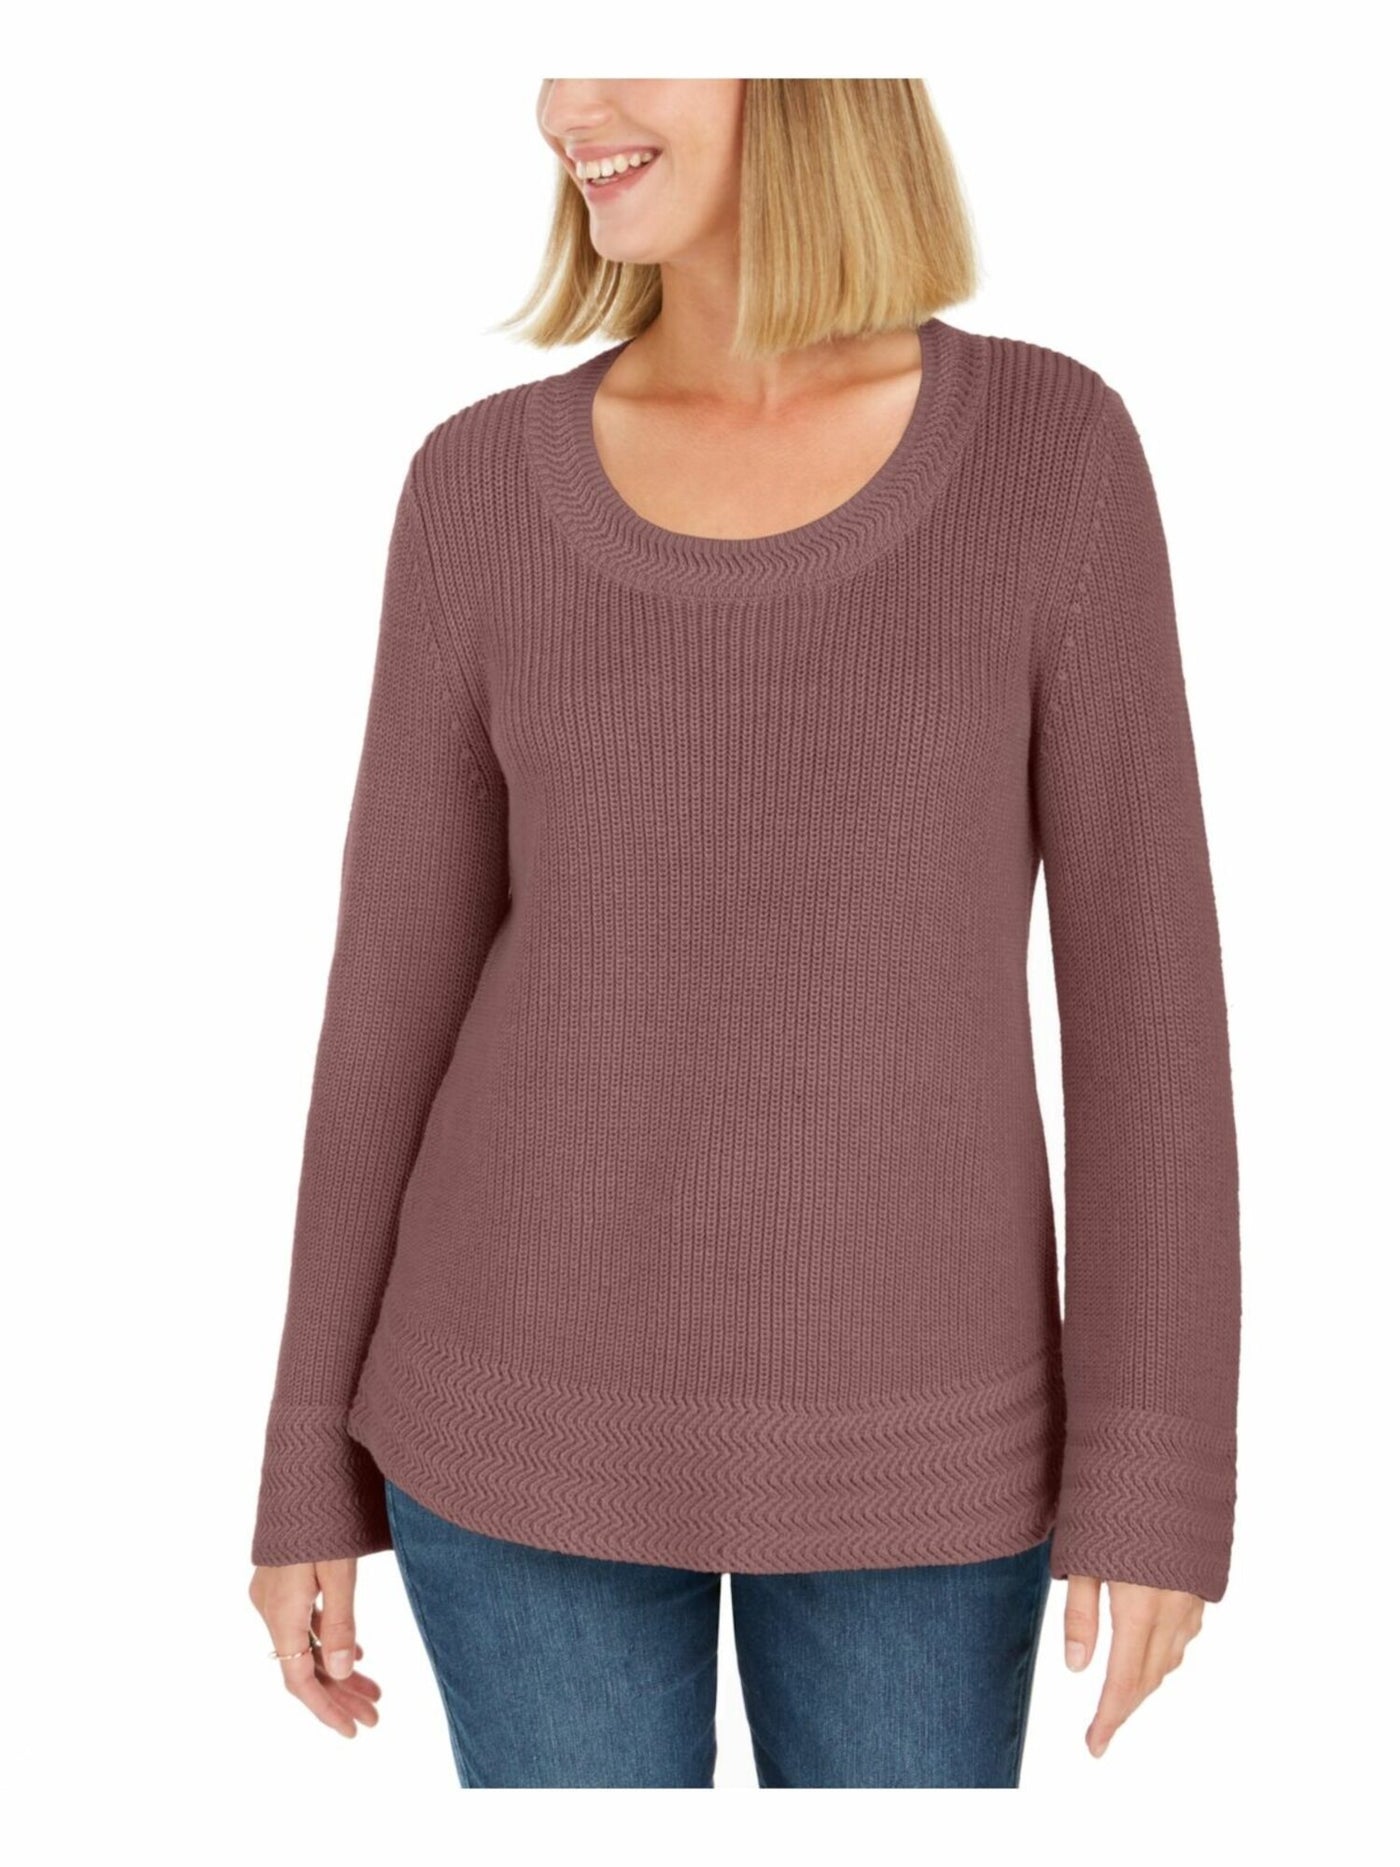 STYLE & COMPANY Womens Purple Long Sleeve Scoop Neck Sweater Petites Size: PS